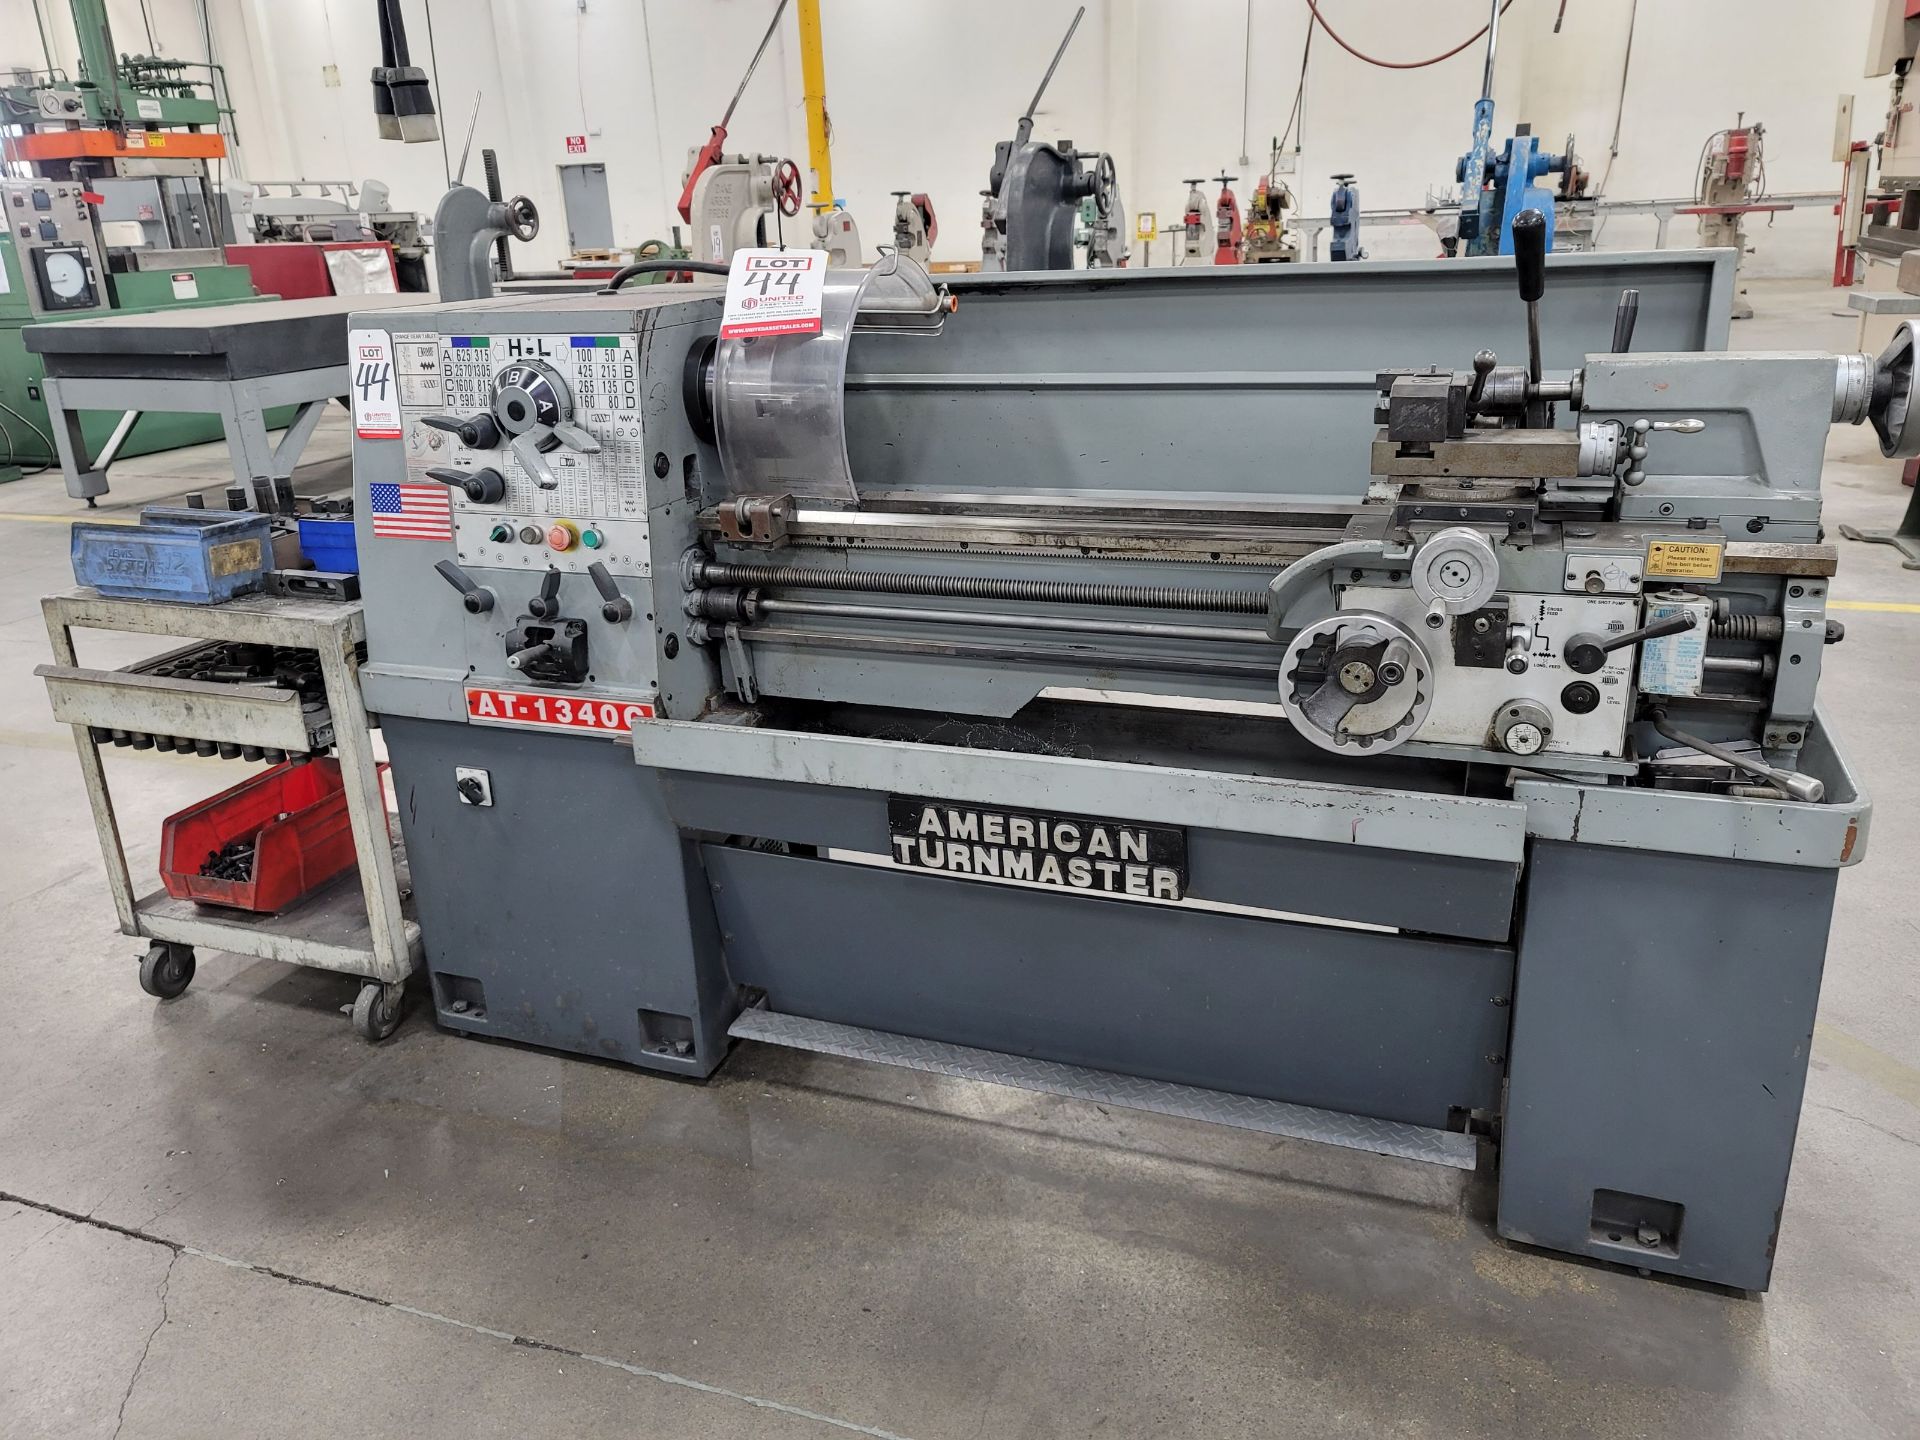 AMERICAN TURNMASTER ENGINE LATHE, MODEL AT1340G, S/N 13406111720, 8" 3-JAW SELF-CENTERING CHUCK,